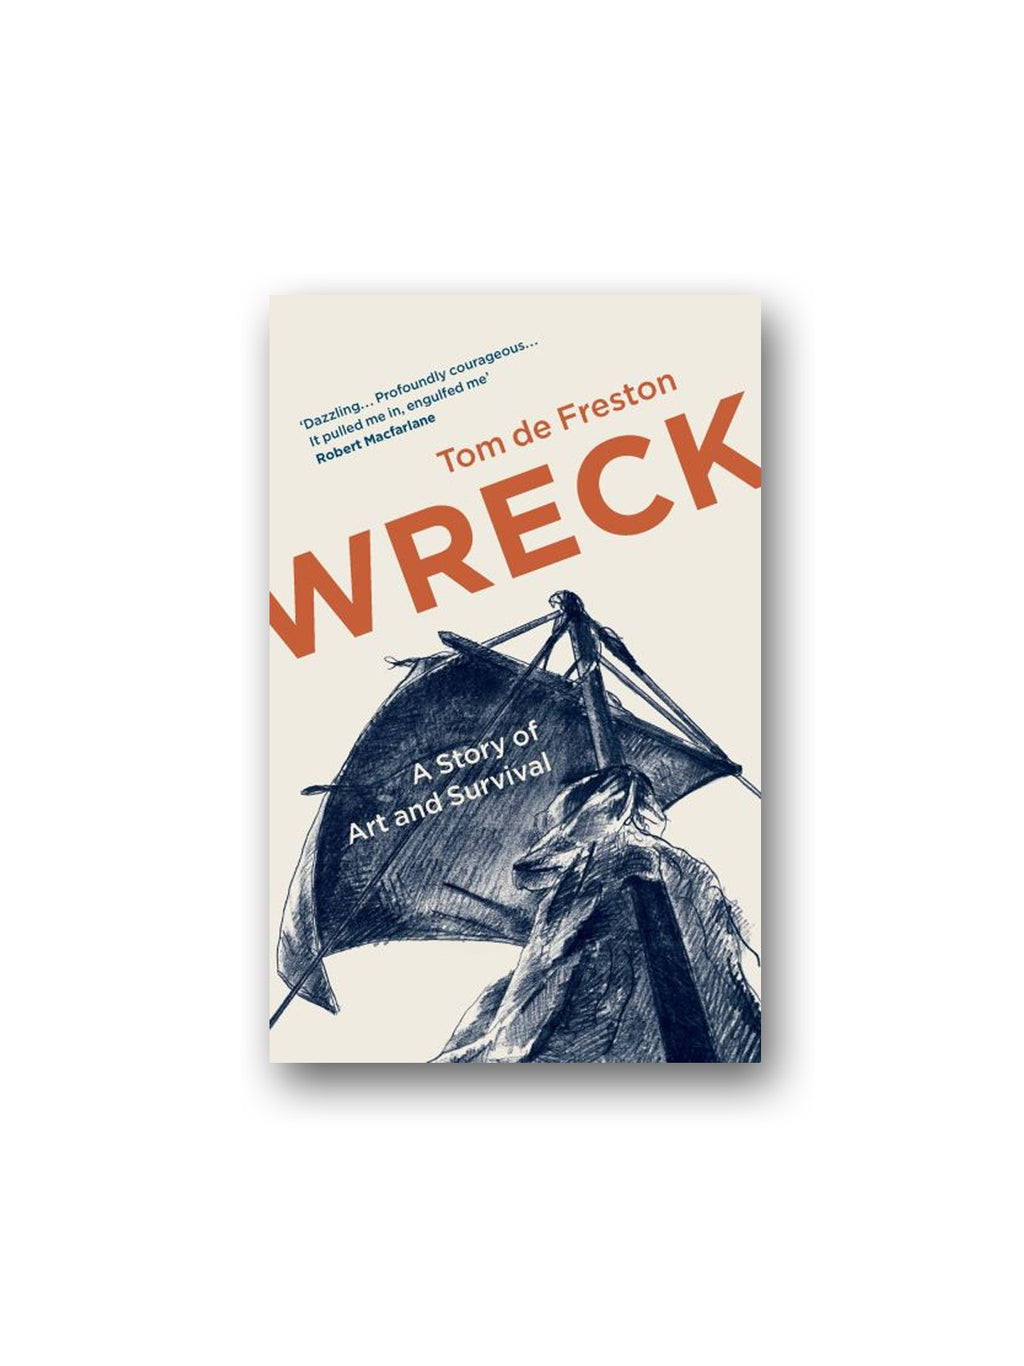 Wreck : A Story of Art and Survival